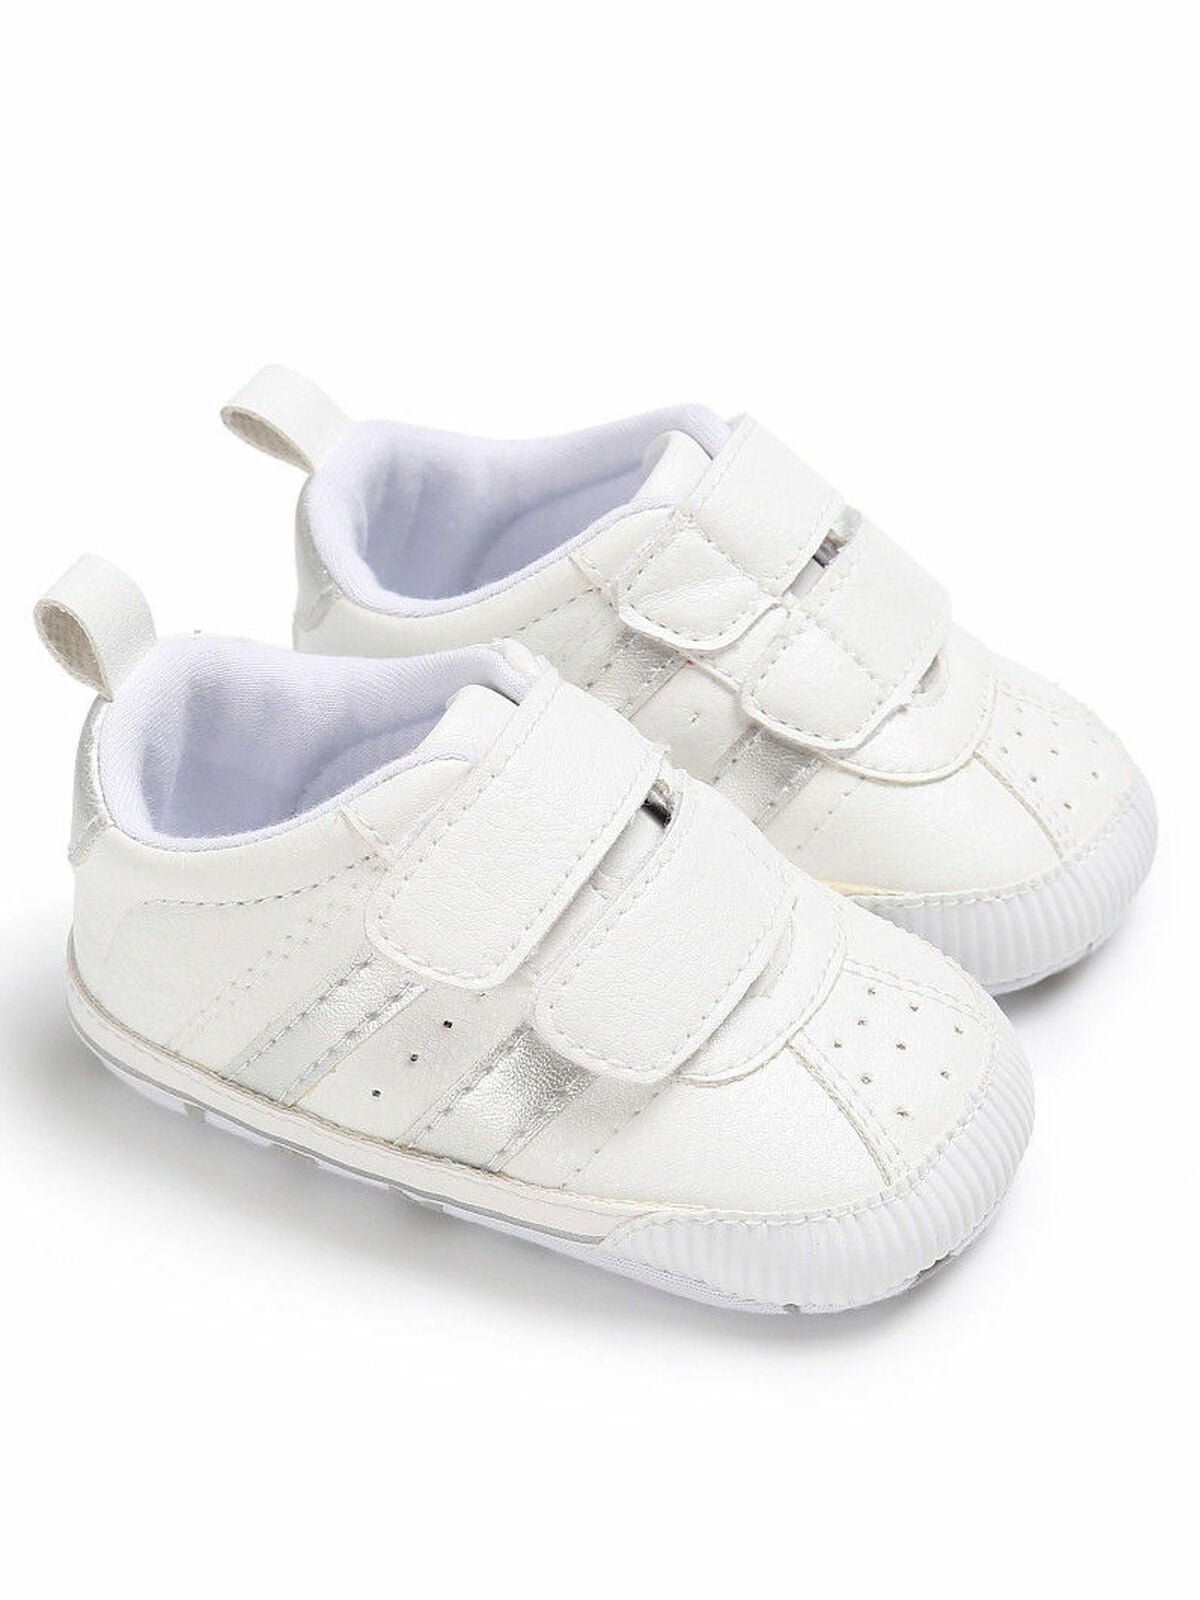 infant brand shoes